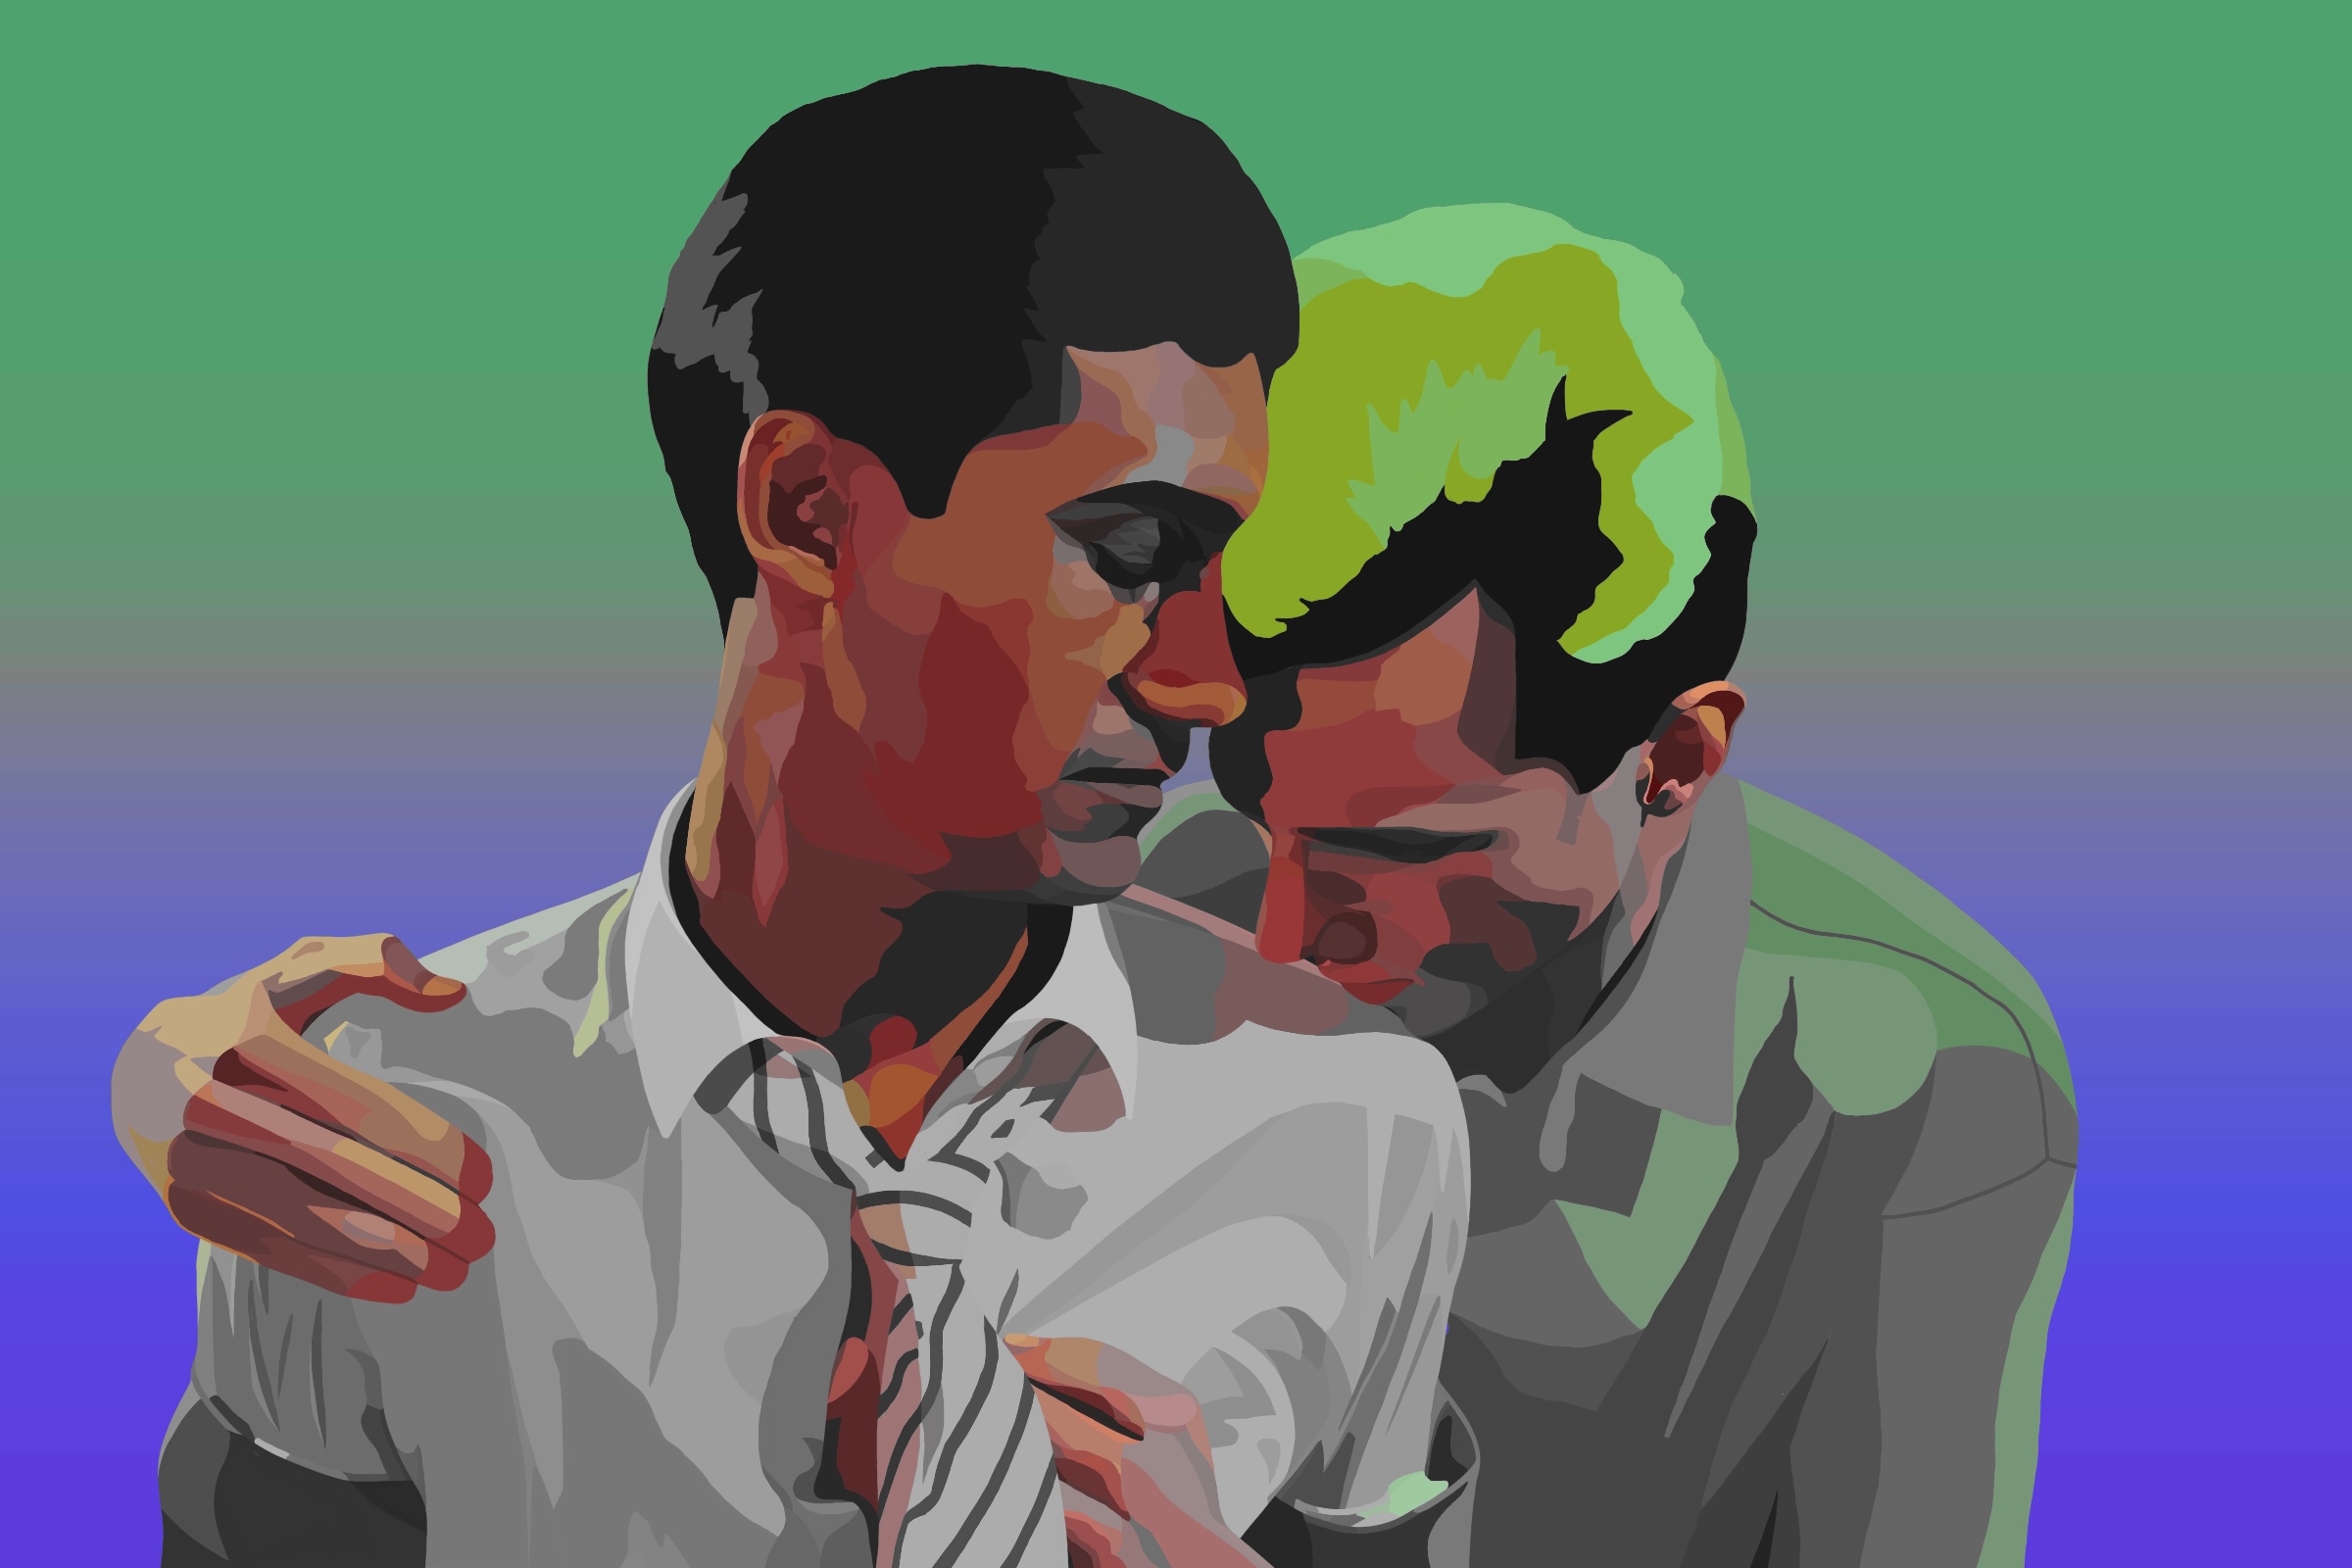 illustration of Omar and johnny embracing from My Beautiful Laundrette